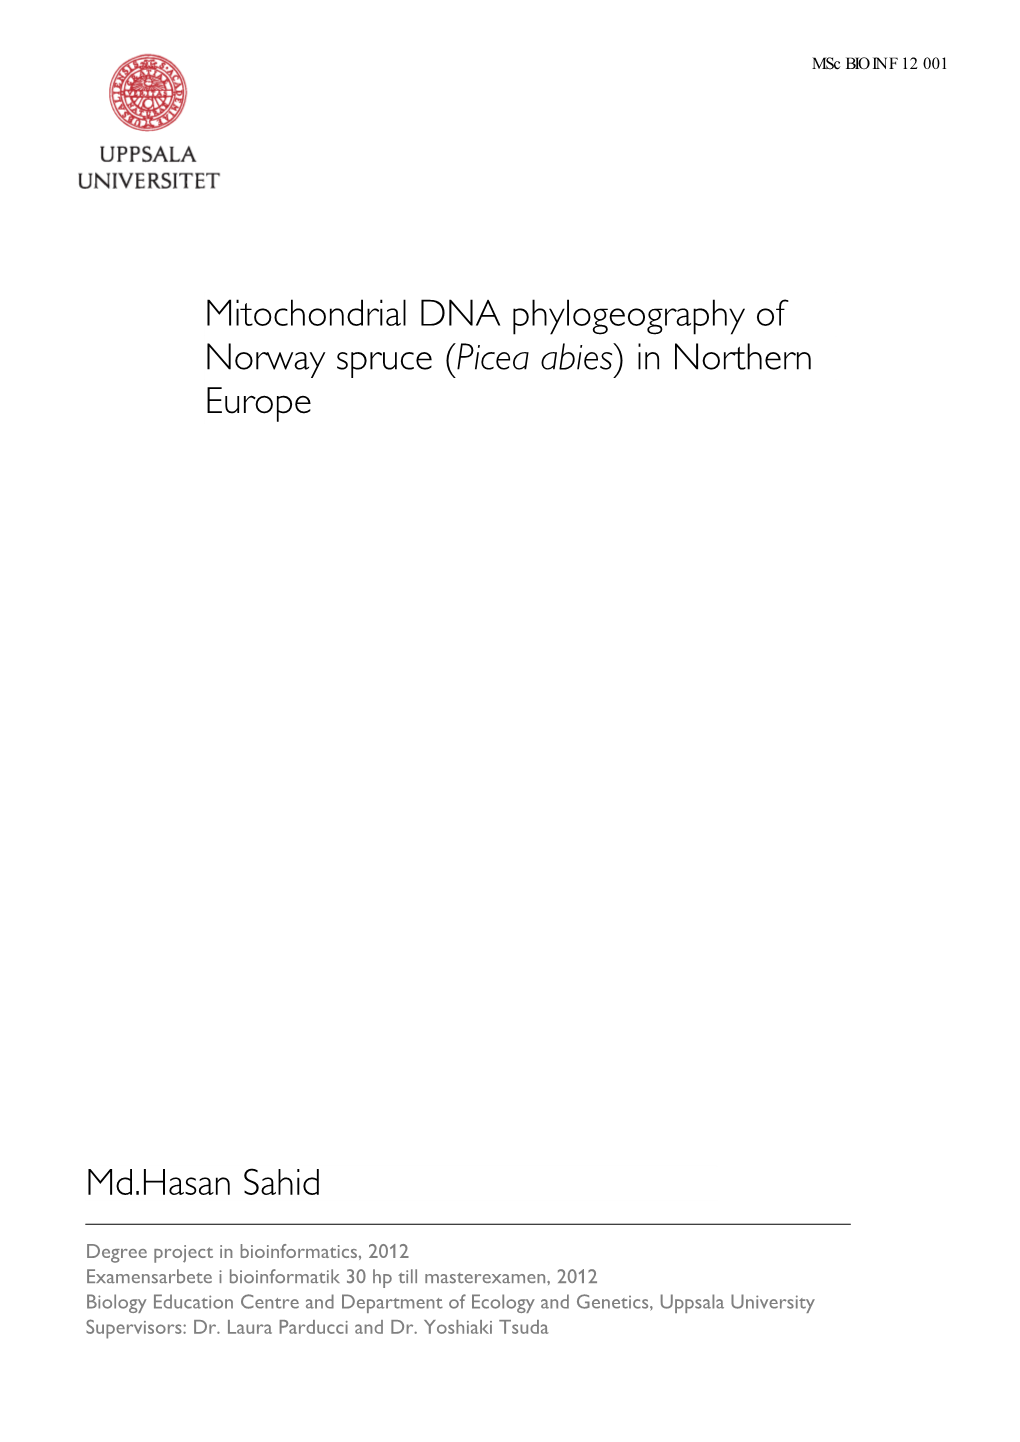 Mitochondrial DNA Phylogeography of Norway Spruce ( Picea Abies ) in Northern Europe